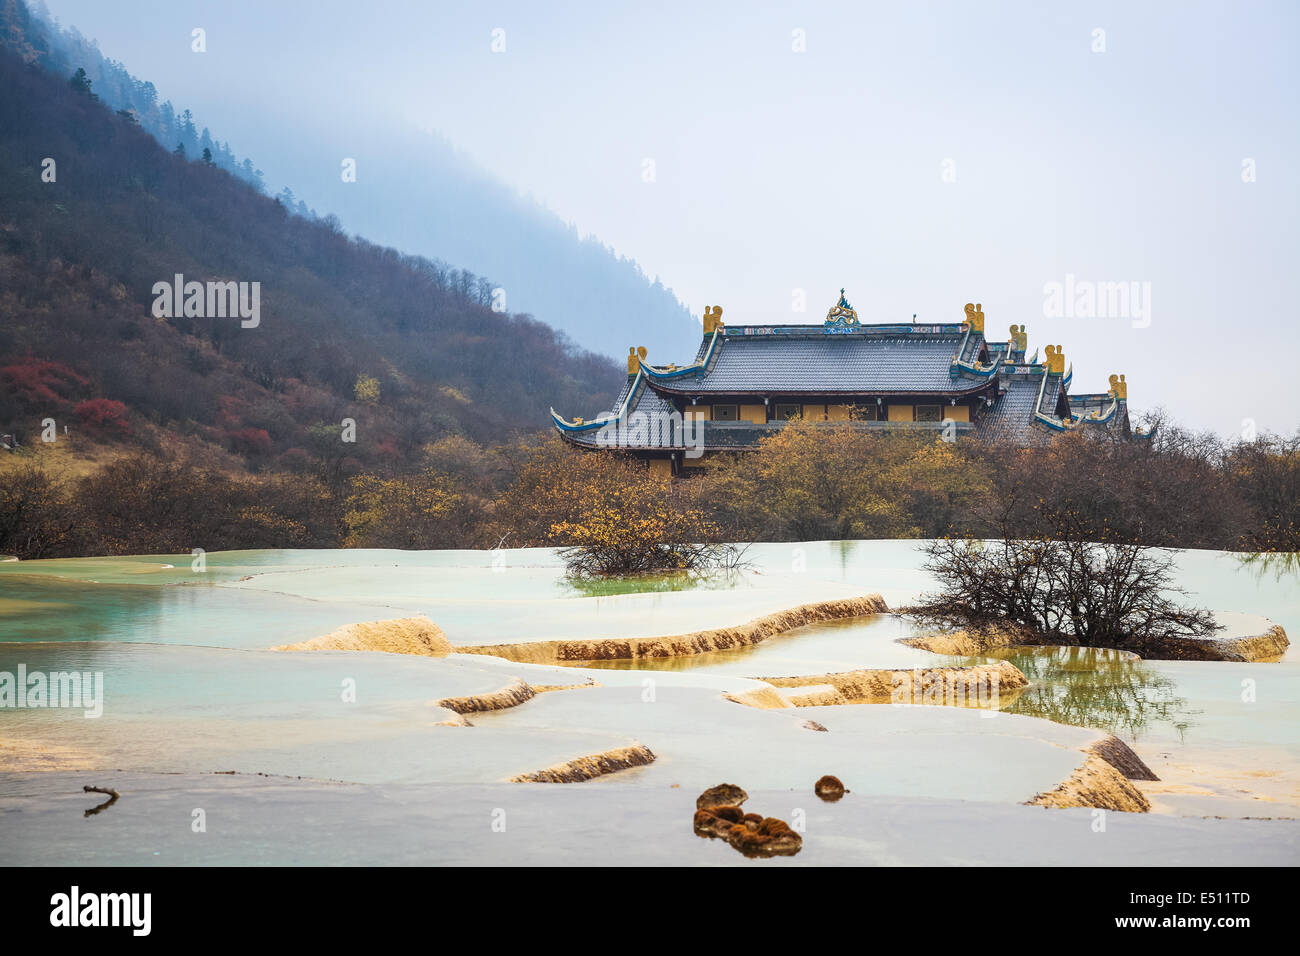 huanglong scenery with calcification pond Stock Photo